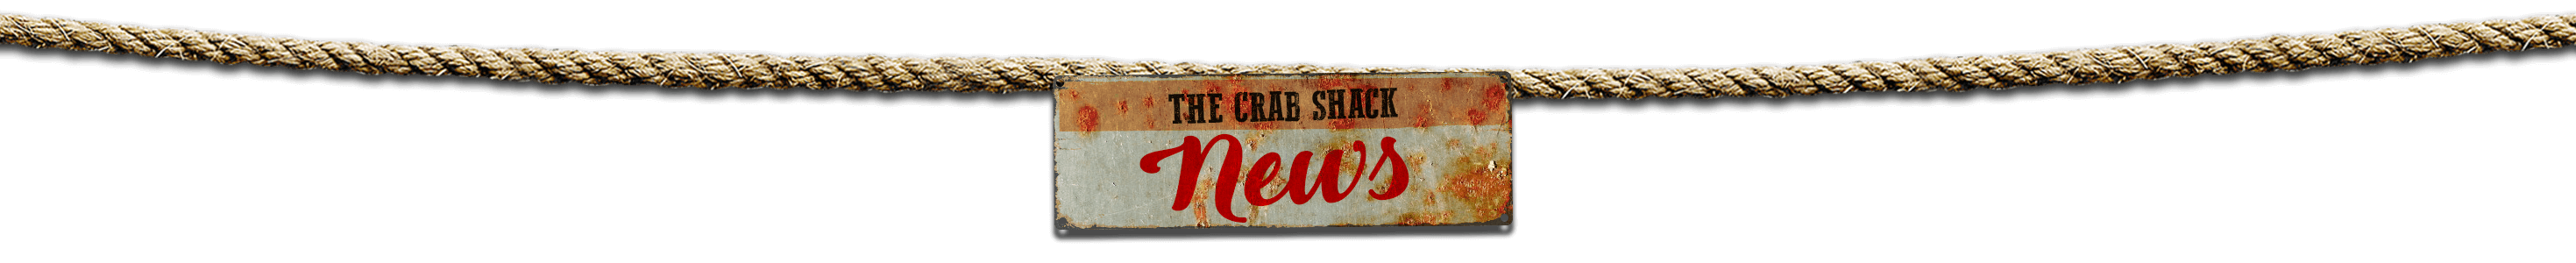 news-even-the-crab-shack